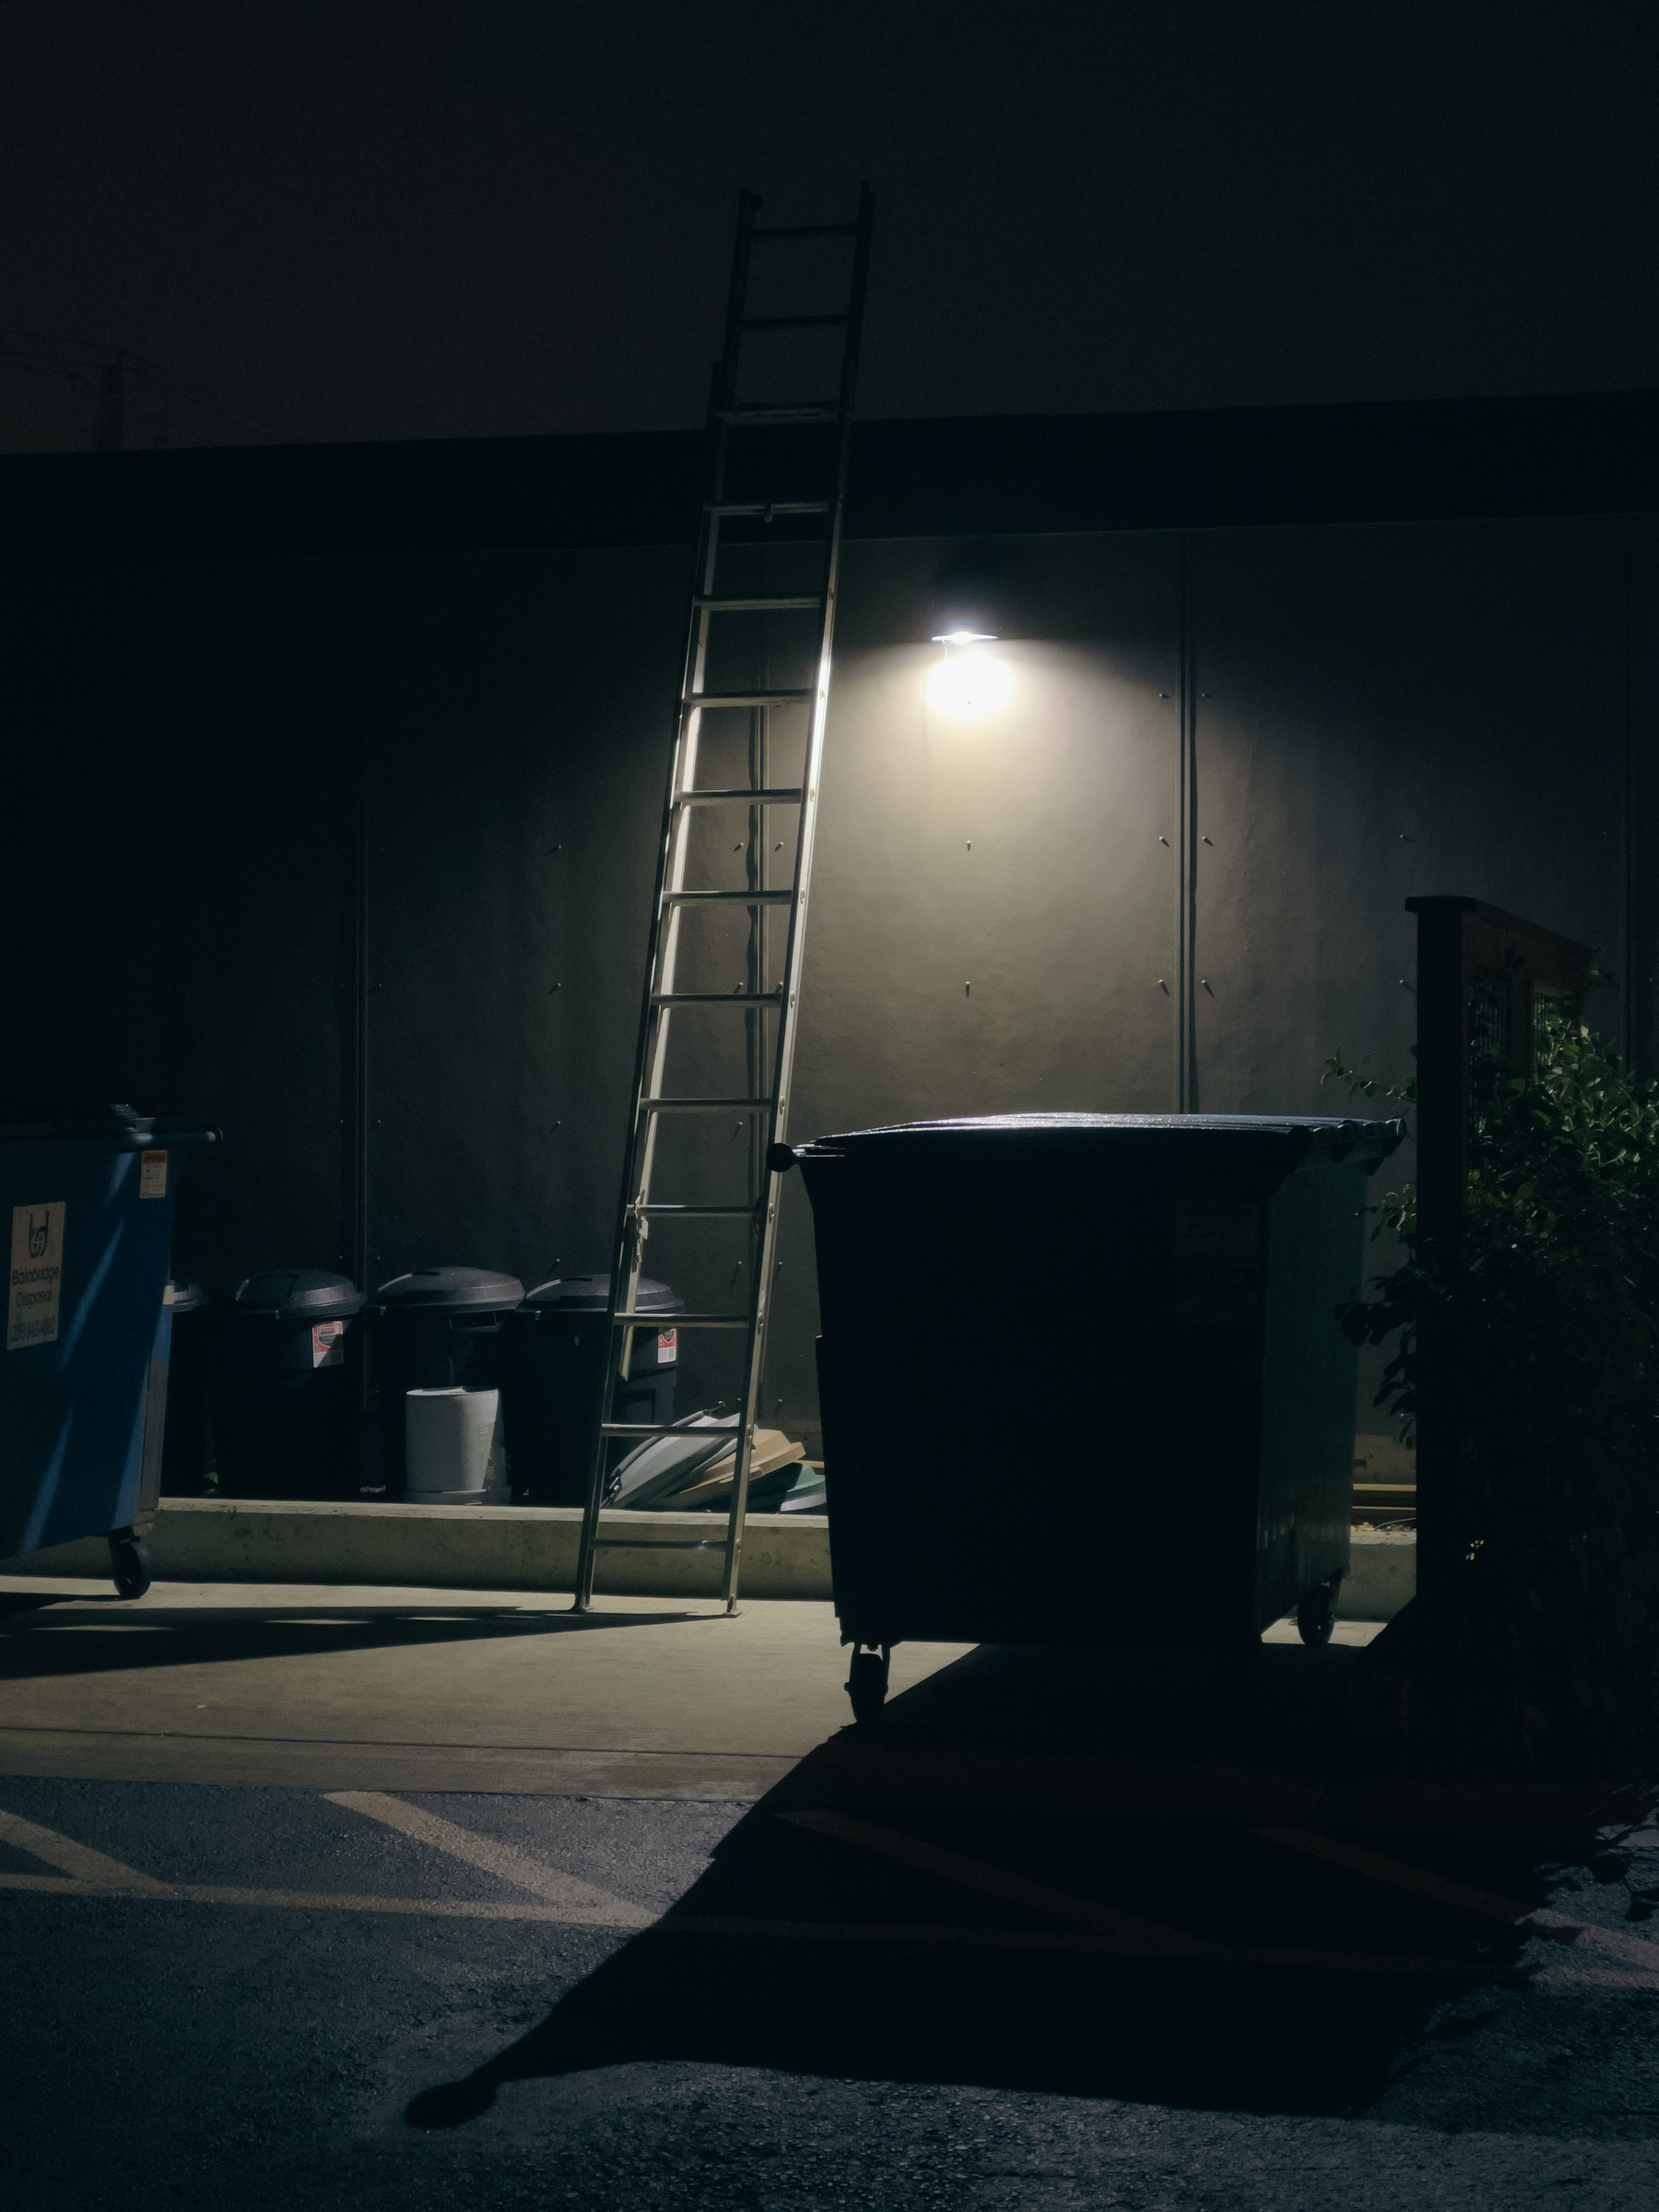 Backside of commercial building at night with ladder leaning against wall and trash bin silhouetted in foreground.